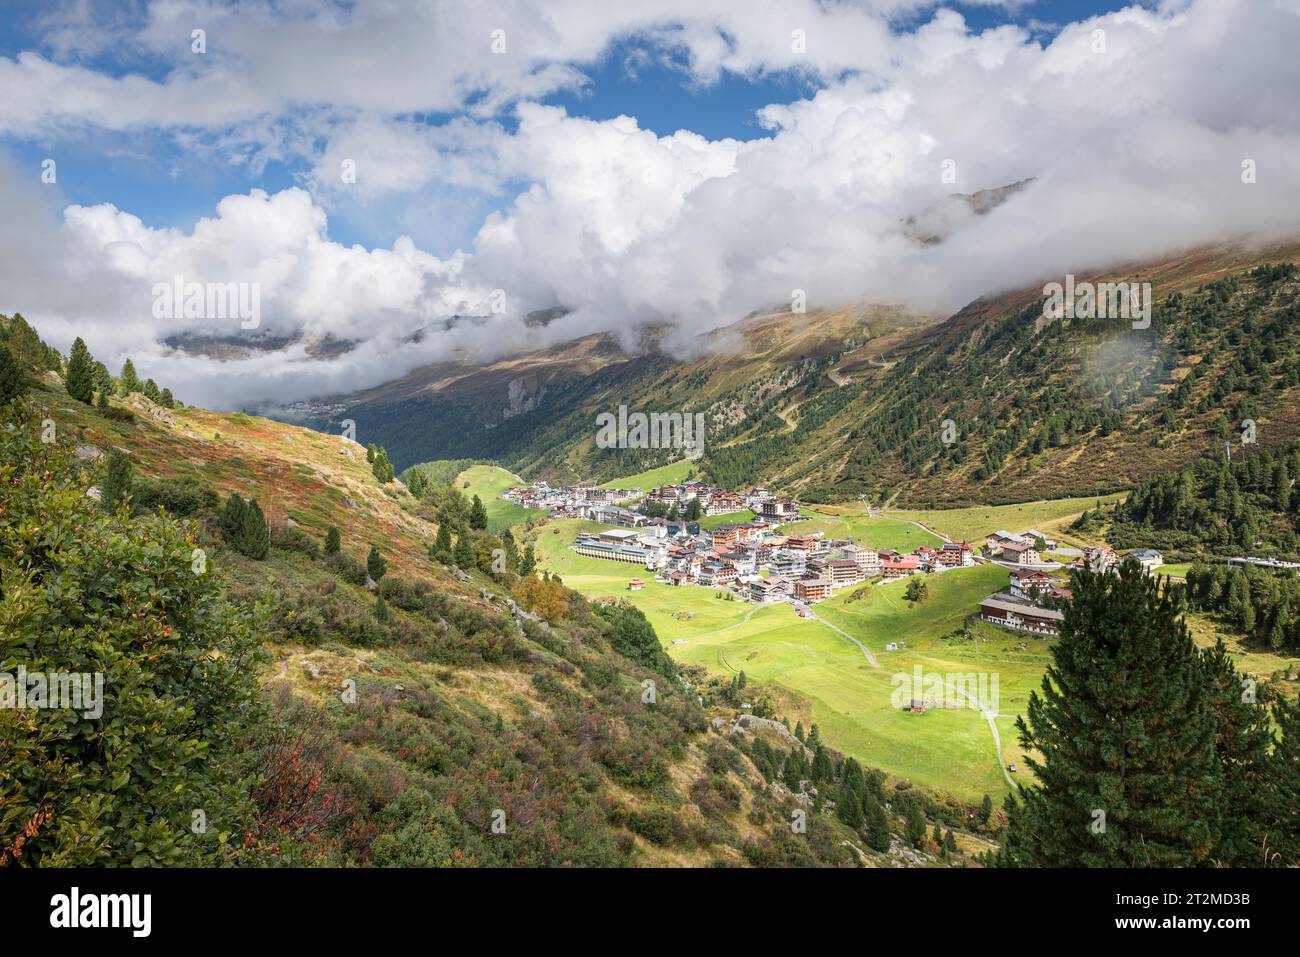 Sun and swelling clouds in the mountains above Obergurgl in the Ötztal Alps in late summer, Tyrol, Austria Stock Photo